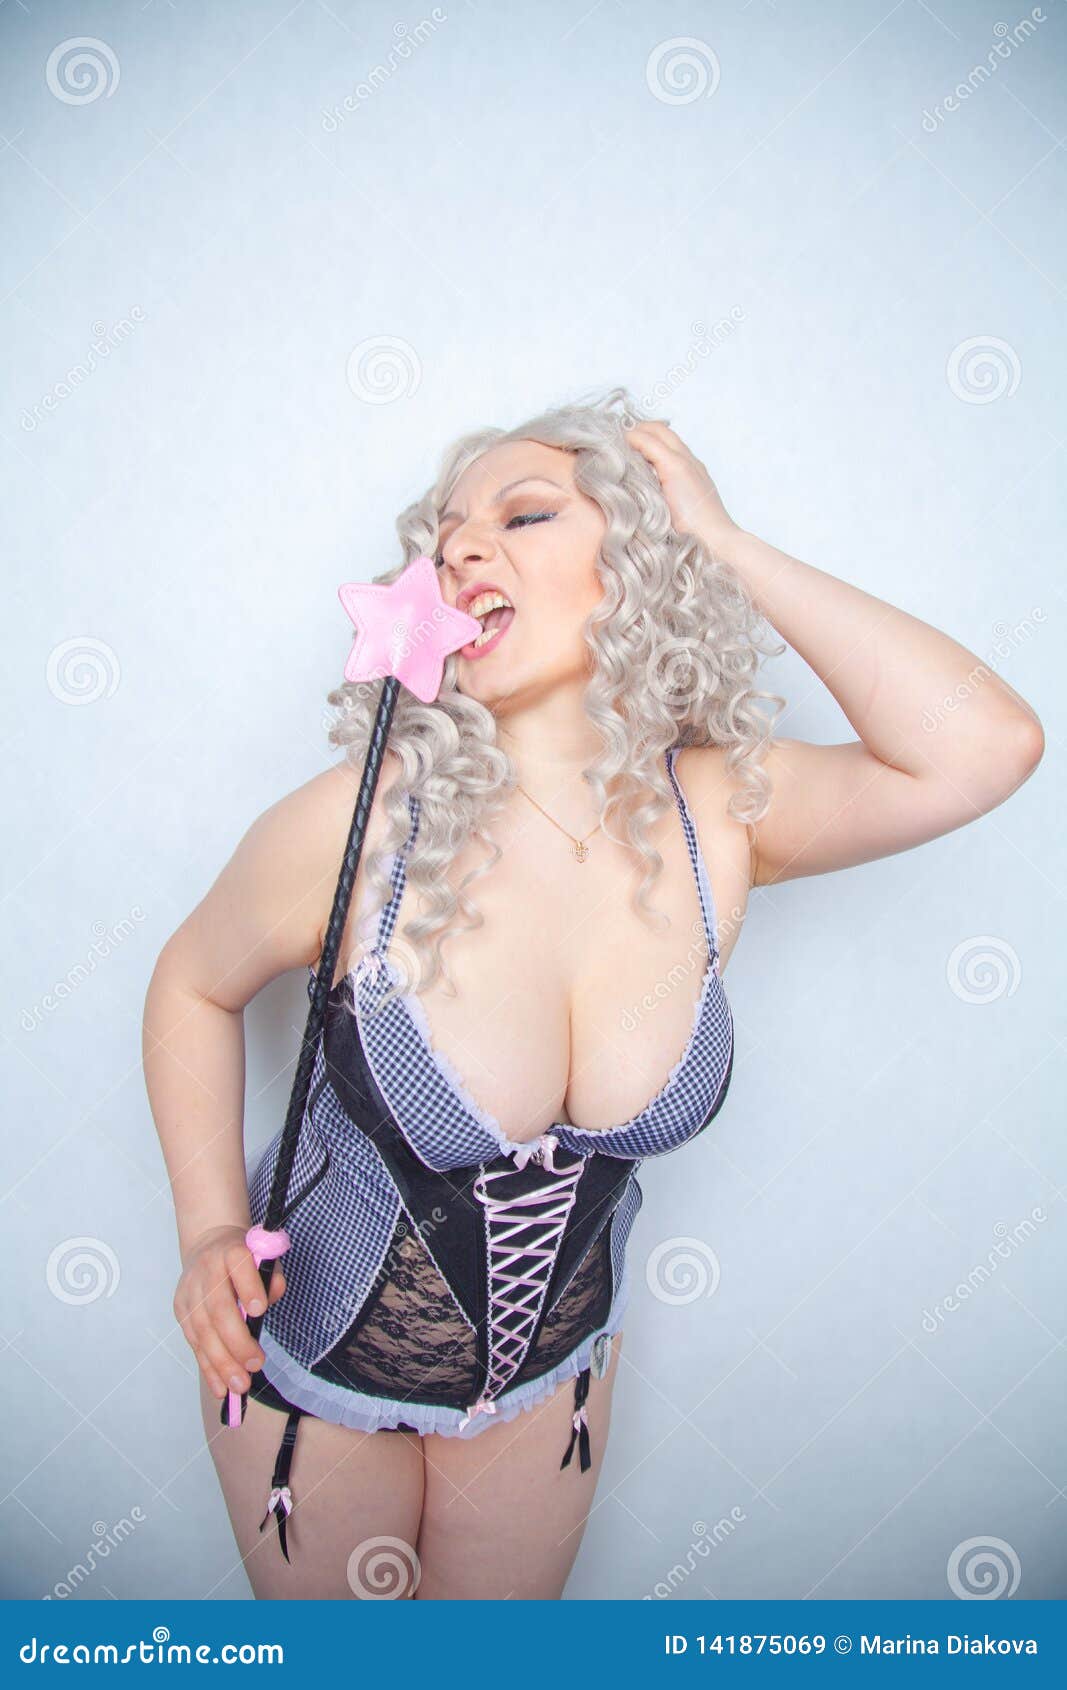 Caucasian Curvy Girl in Erotic Lingerie with Leather Bdsm Riding Crop Standing As Advanced Vanilla Person Ready for Kinky Sex on W Stock Image image